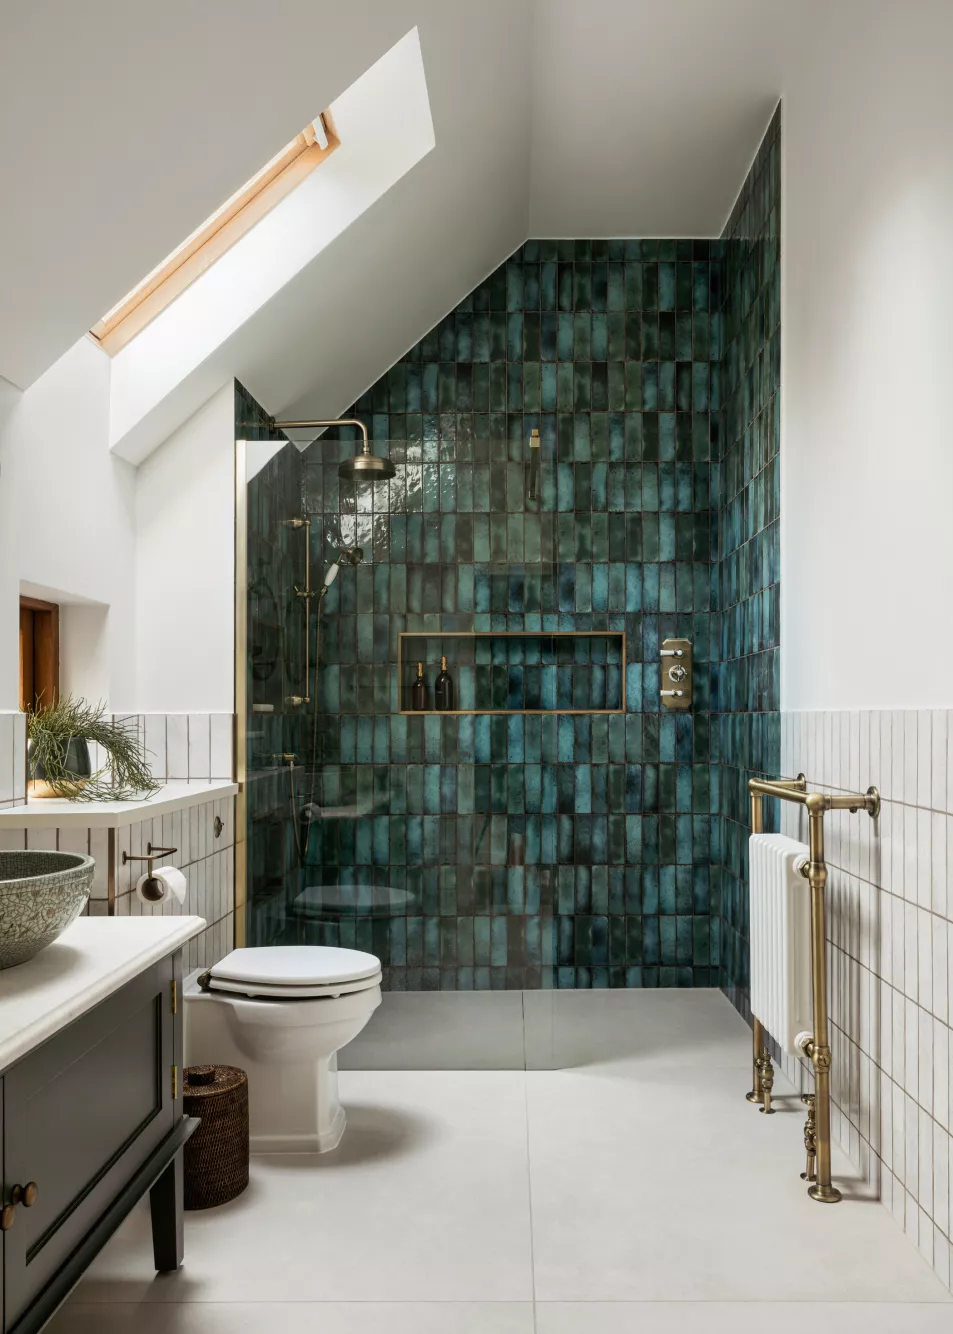 Tiled walk-in shower to illustrate standout tiles trend